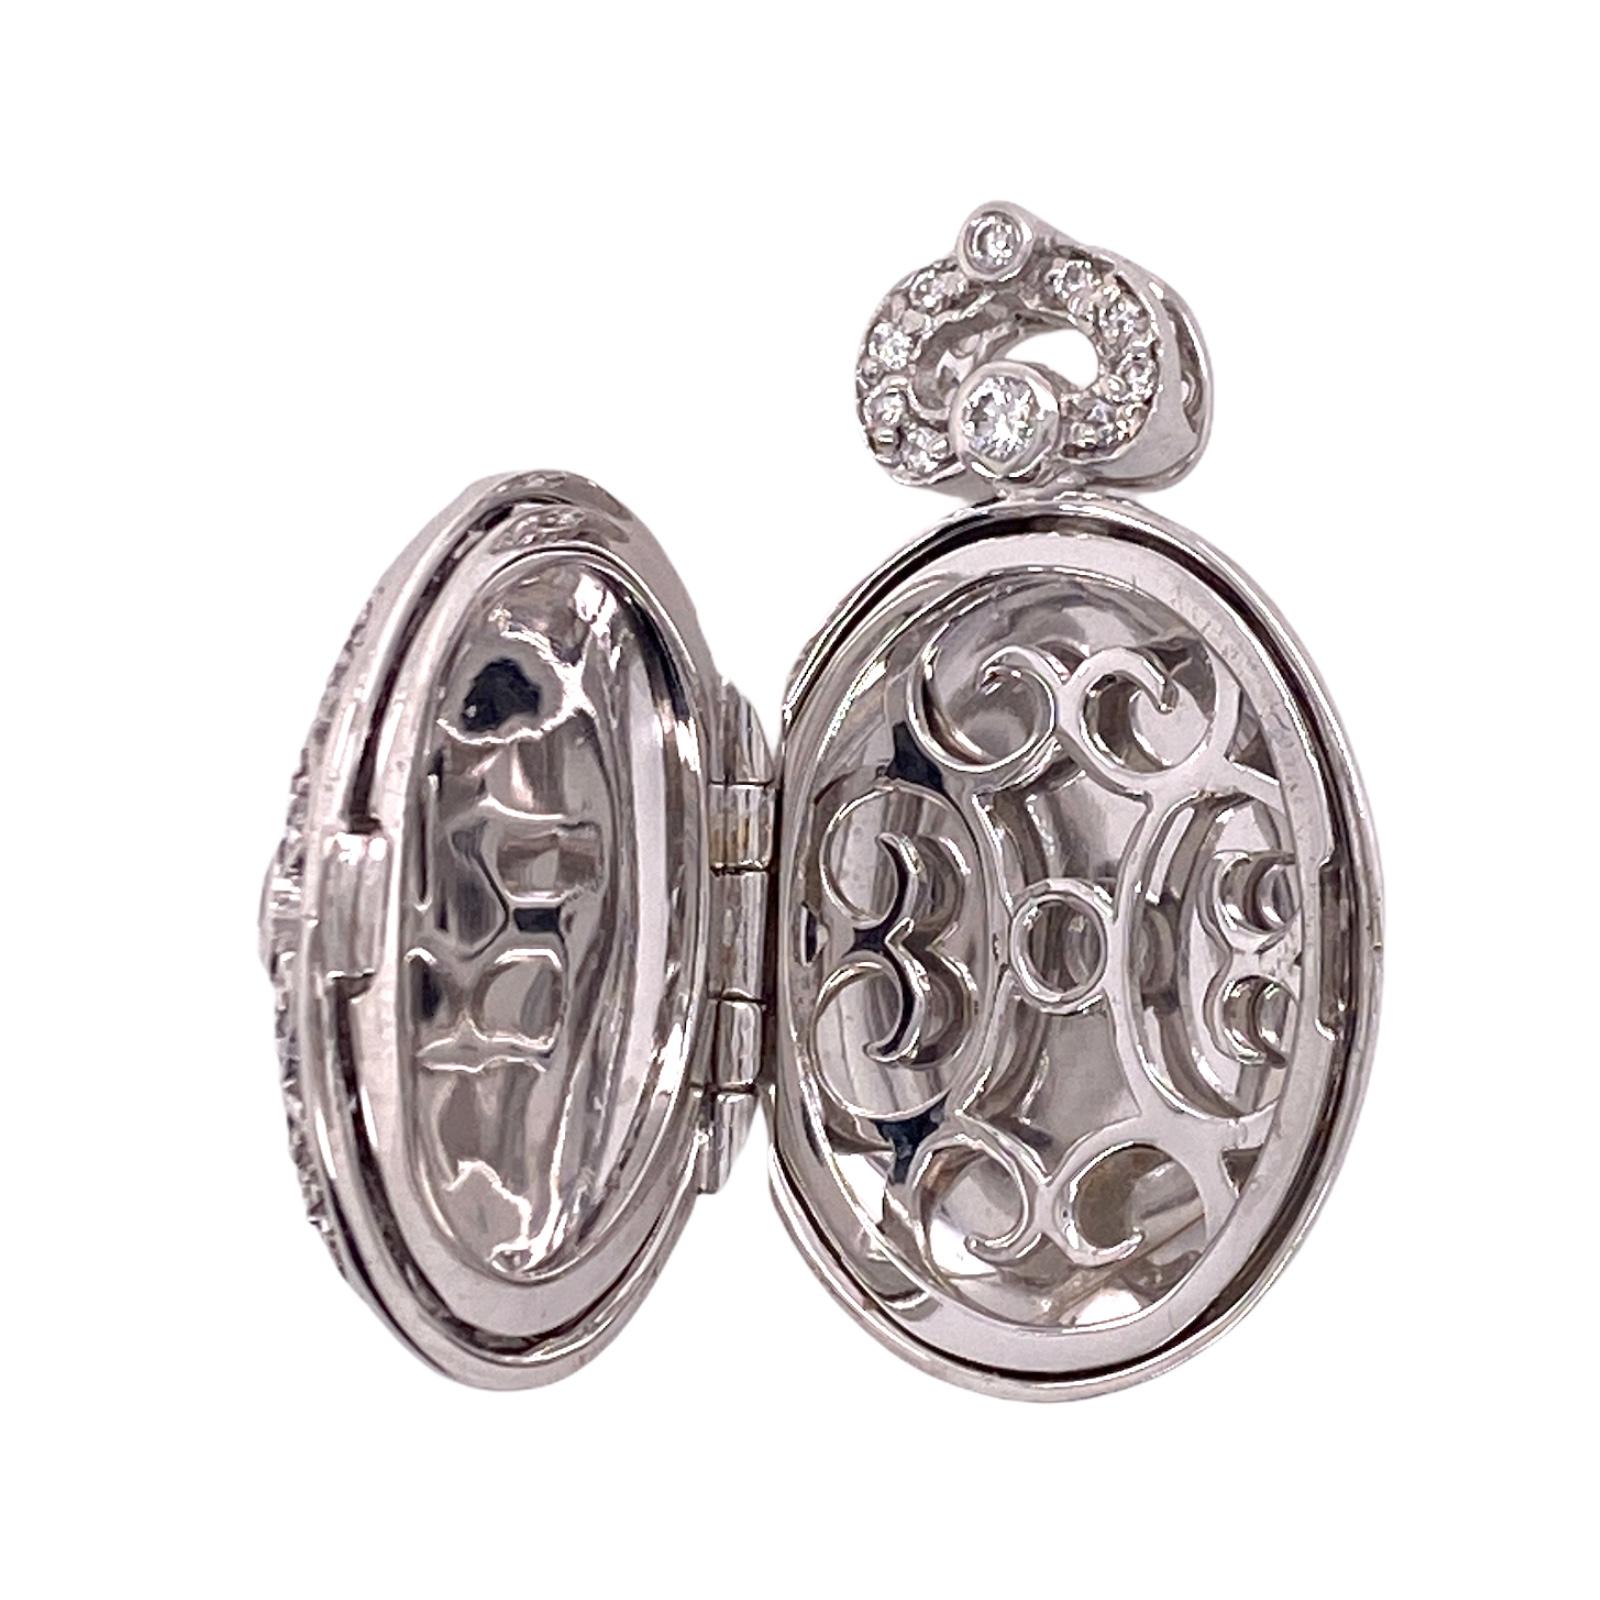 Diamond locket fashioned in `18 karat white gold. The locket features rose cut diamonds weighing approximately 1.25 carat total weight and graded H-I color and SI clarity. The pendant opens for inside photos, and measures .25 x 1.25 inches. 